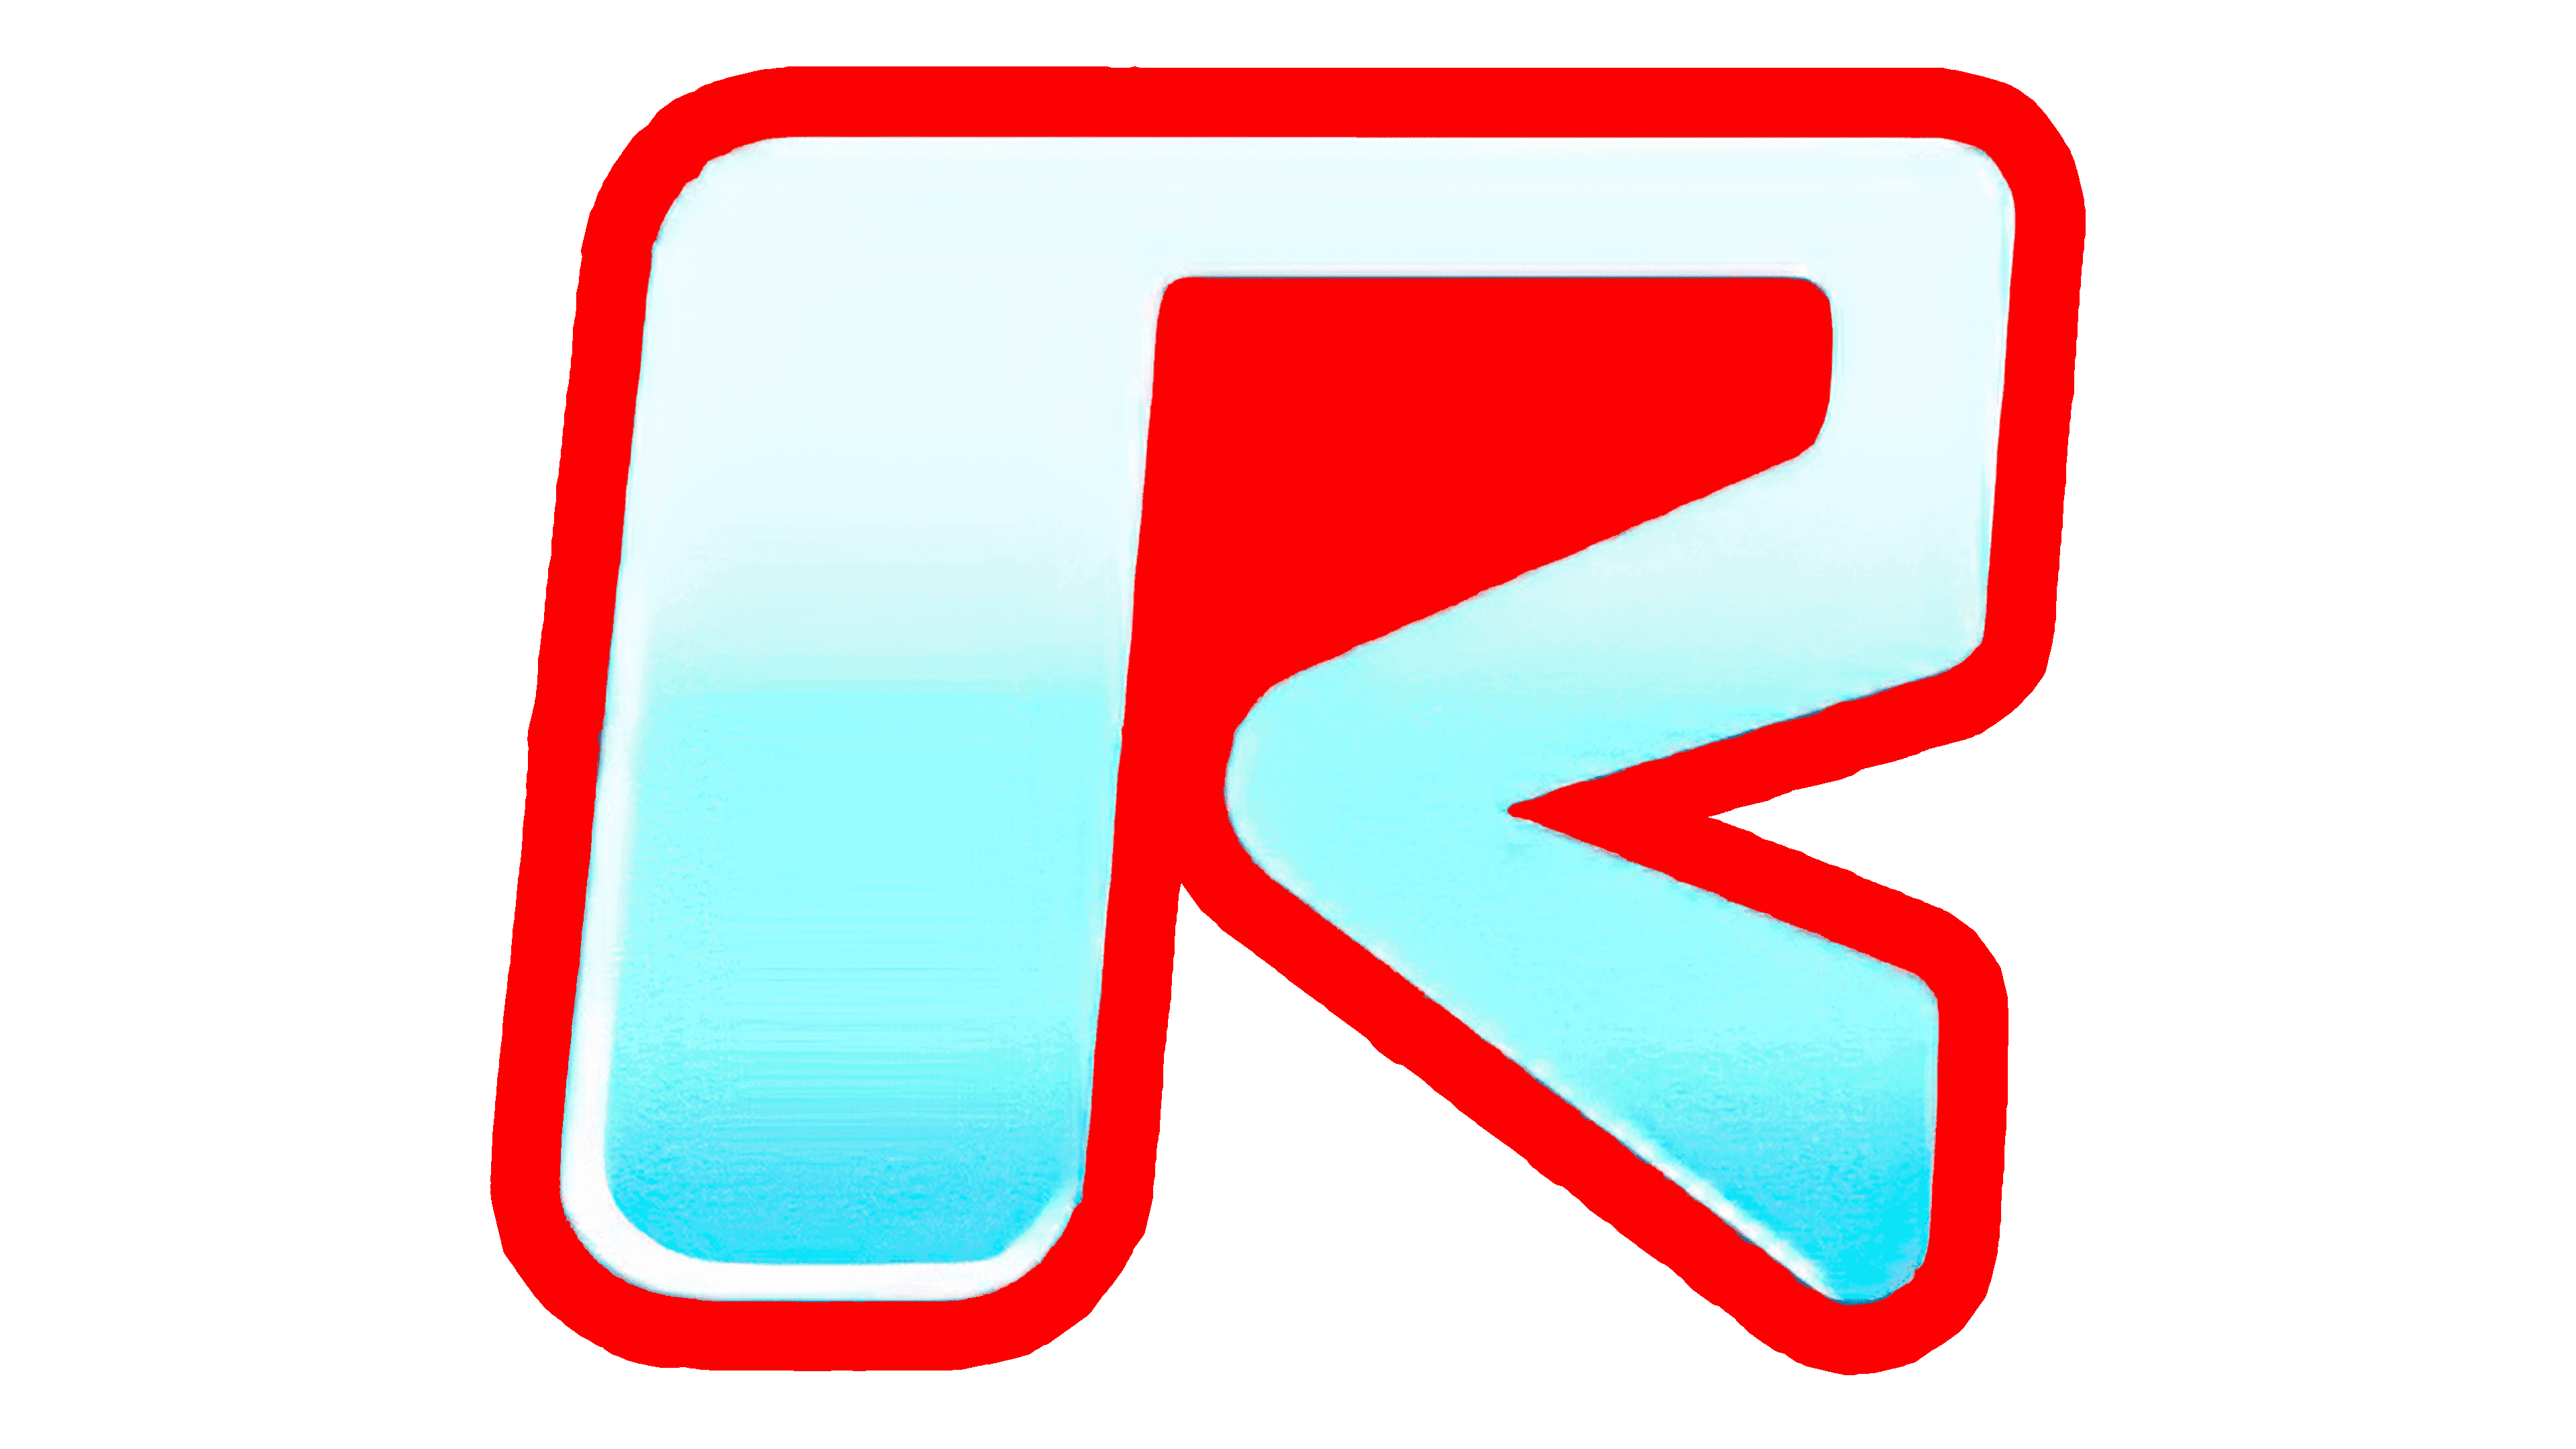 File:Roblox logo (2006).png - Wikimedia Commons